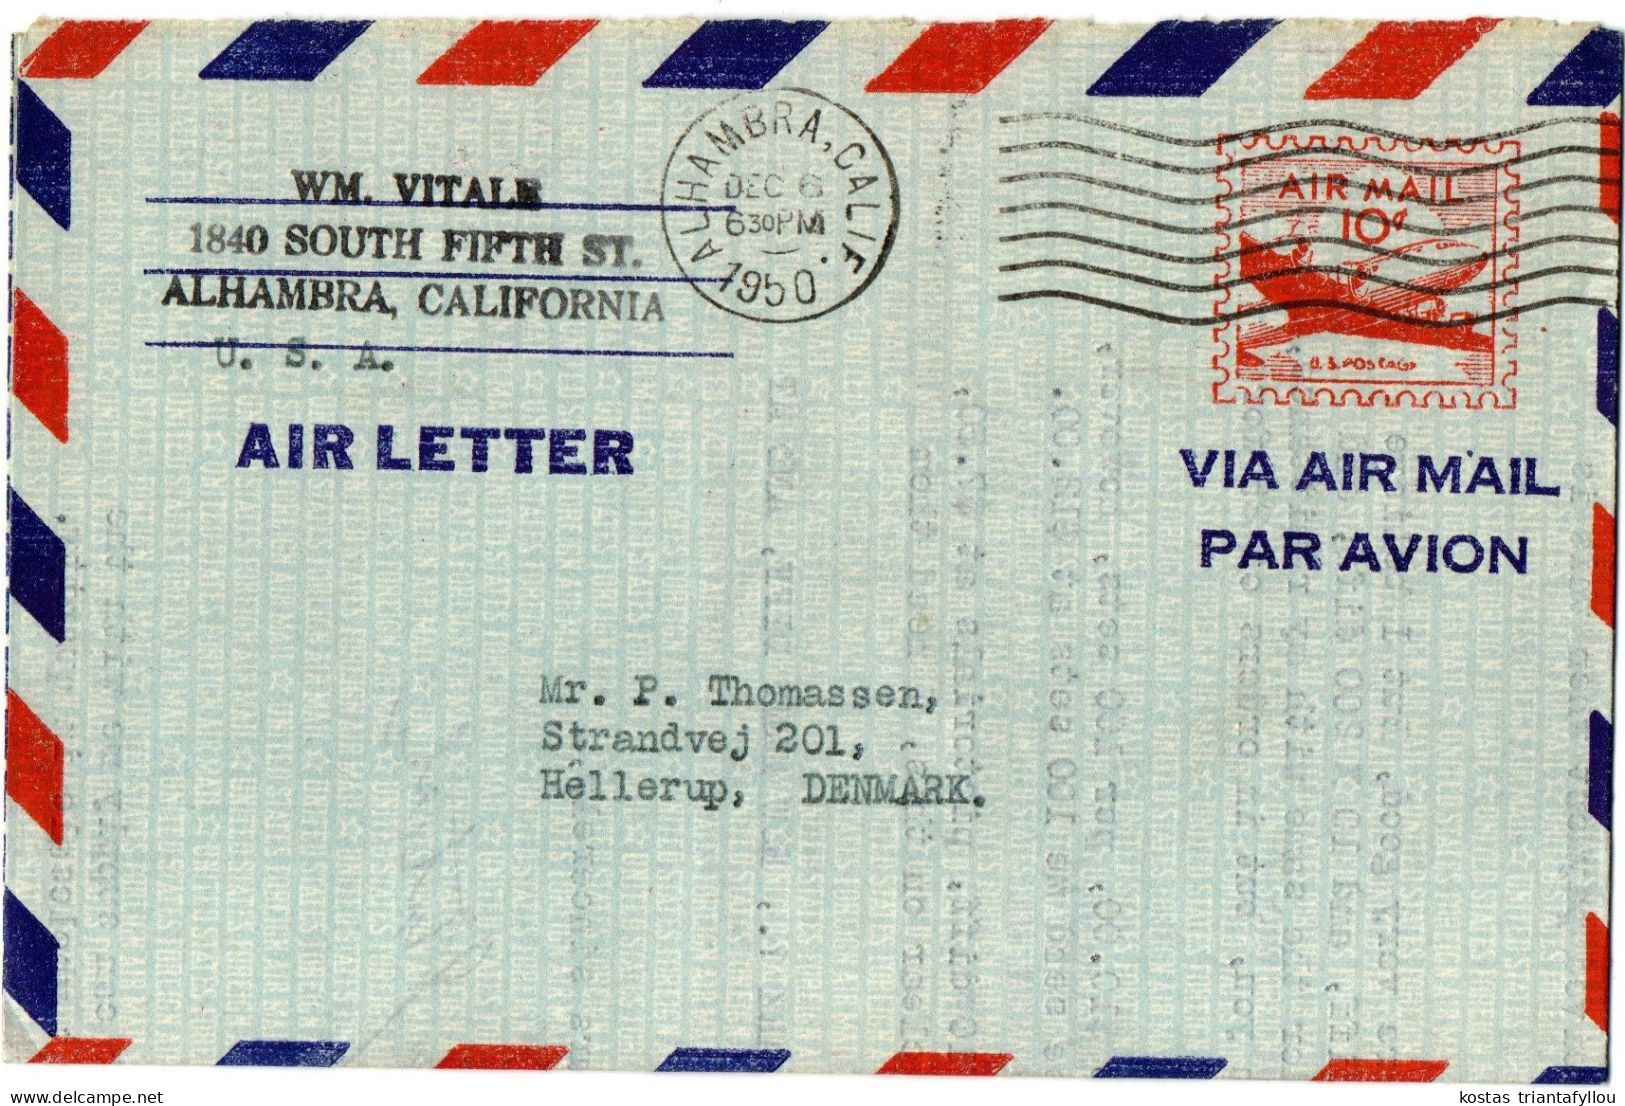 1,66 U.S.A., CALIFORNIA, 1950, AIR LETTER, COVER TO DENMARK (DAMAGED ON THE BACK SIDE) - 2a. 1941-1960 Usati